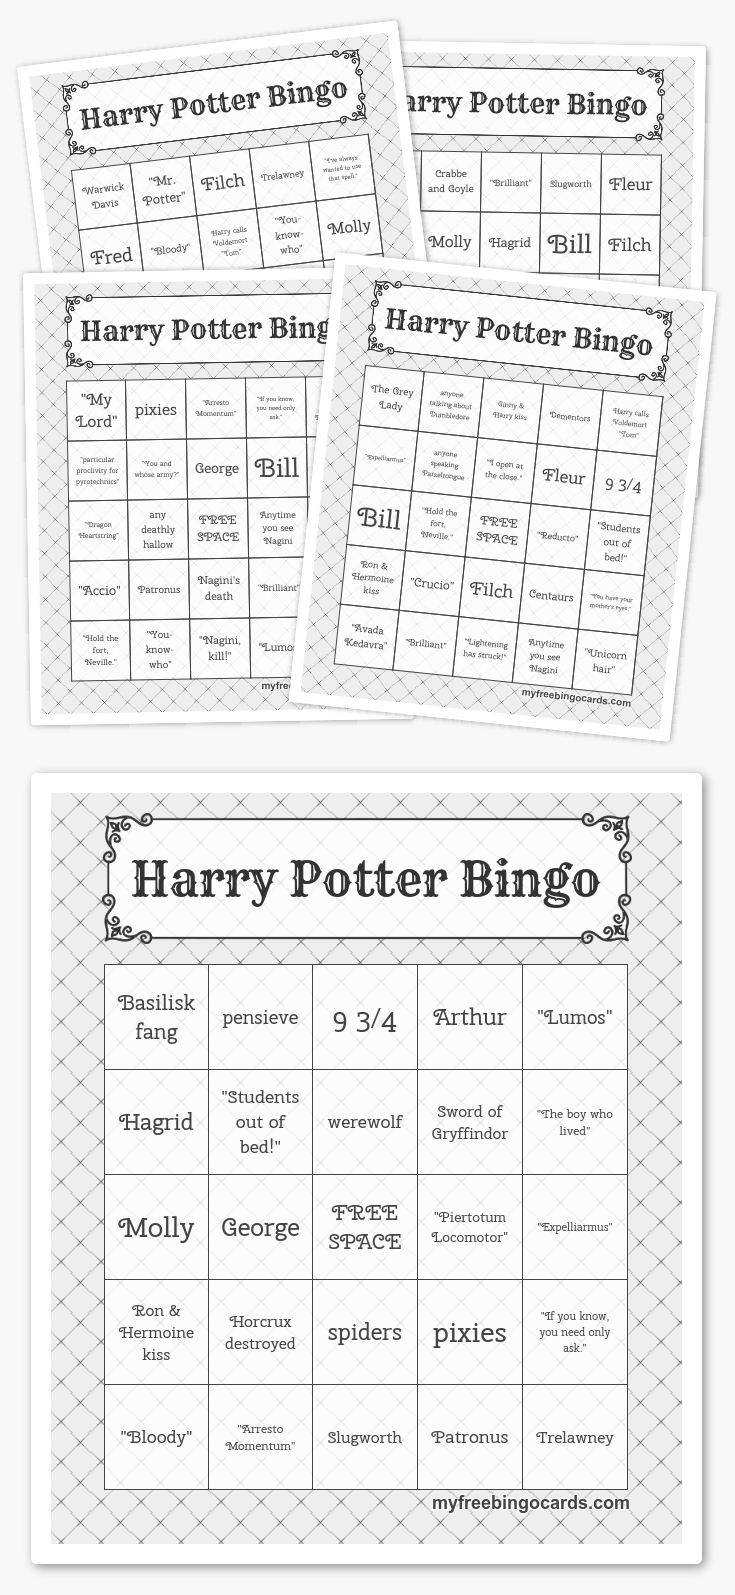 Free Printable Bingo Cards In 2019 | Harry Potter Parties | Harry - Free Printable Recovery Games